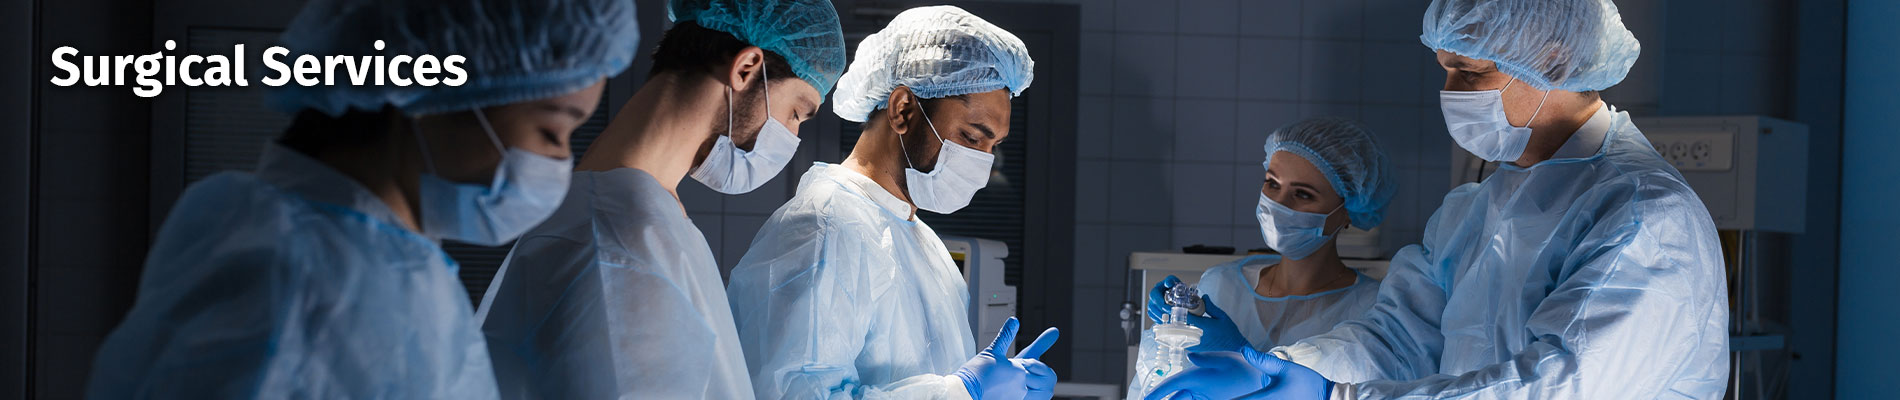 Picture of a surgical team in an operating room that consist of: the surgeon, circulating nurse, surgeon's assistant, anesthesiologist and the surgical tech